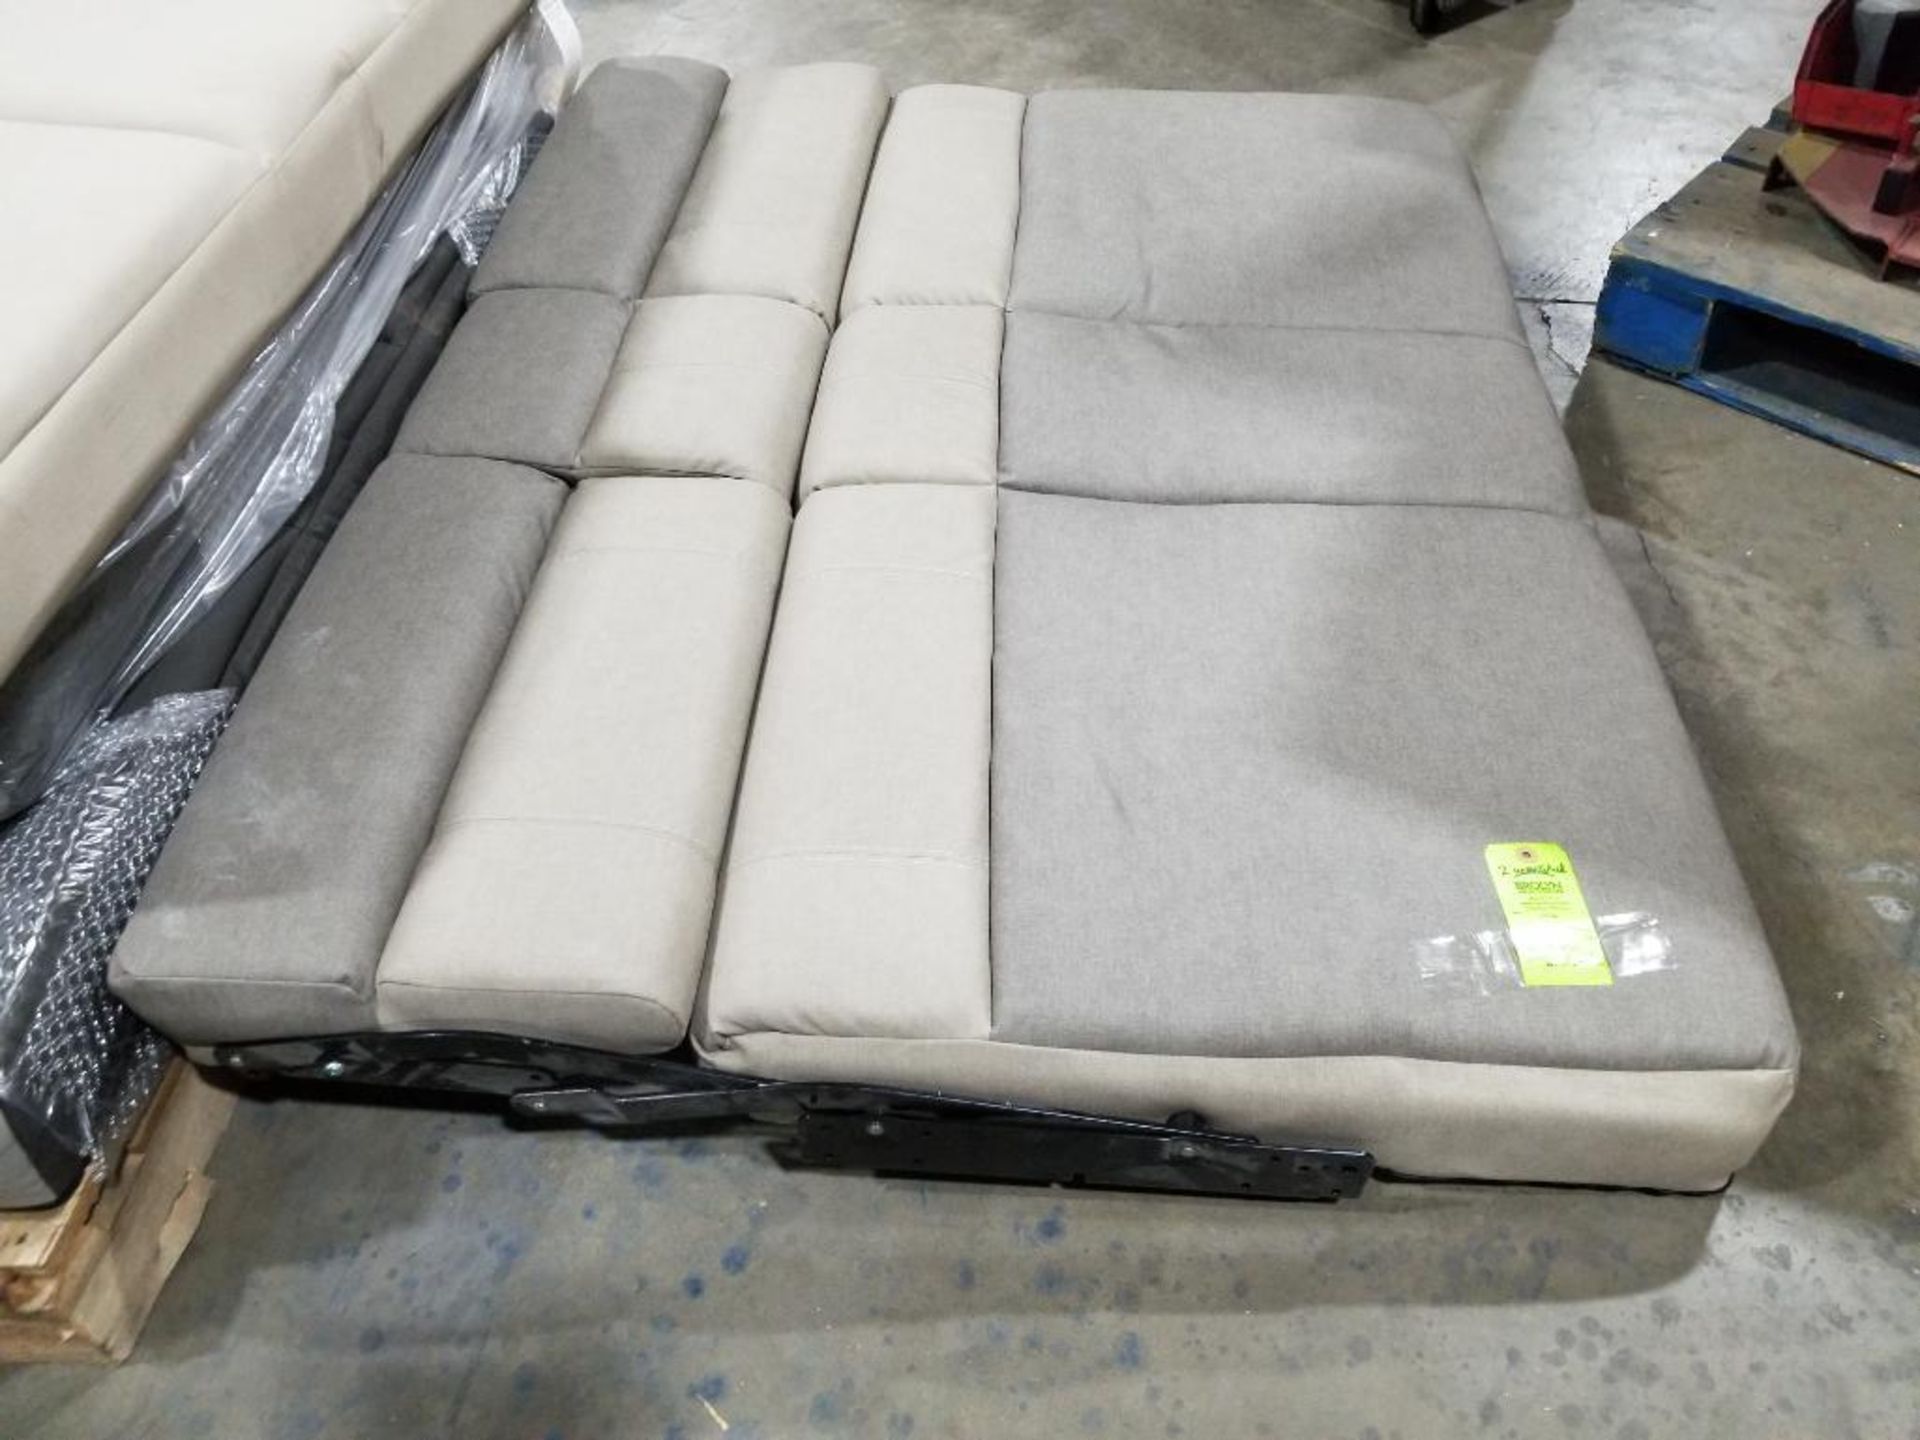 Qty 2 - 60in Happijac 60in fold up bench seating. (one has spots that will require cleaning) - Image 3 of 6